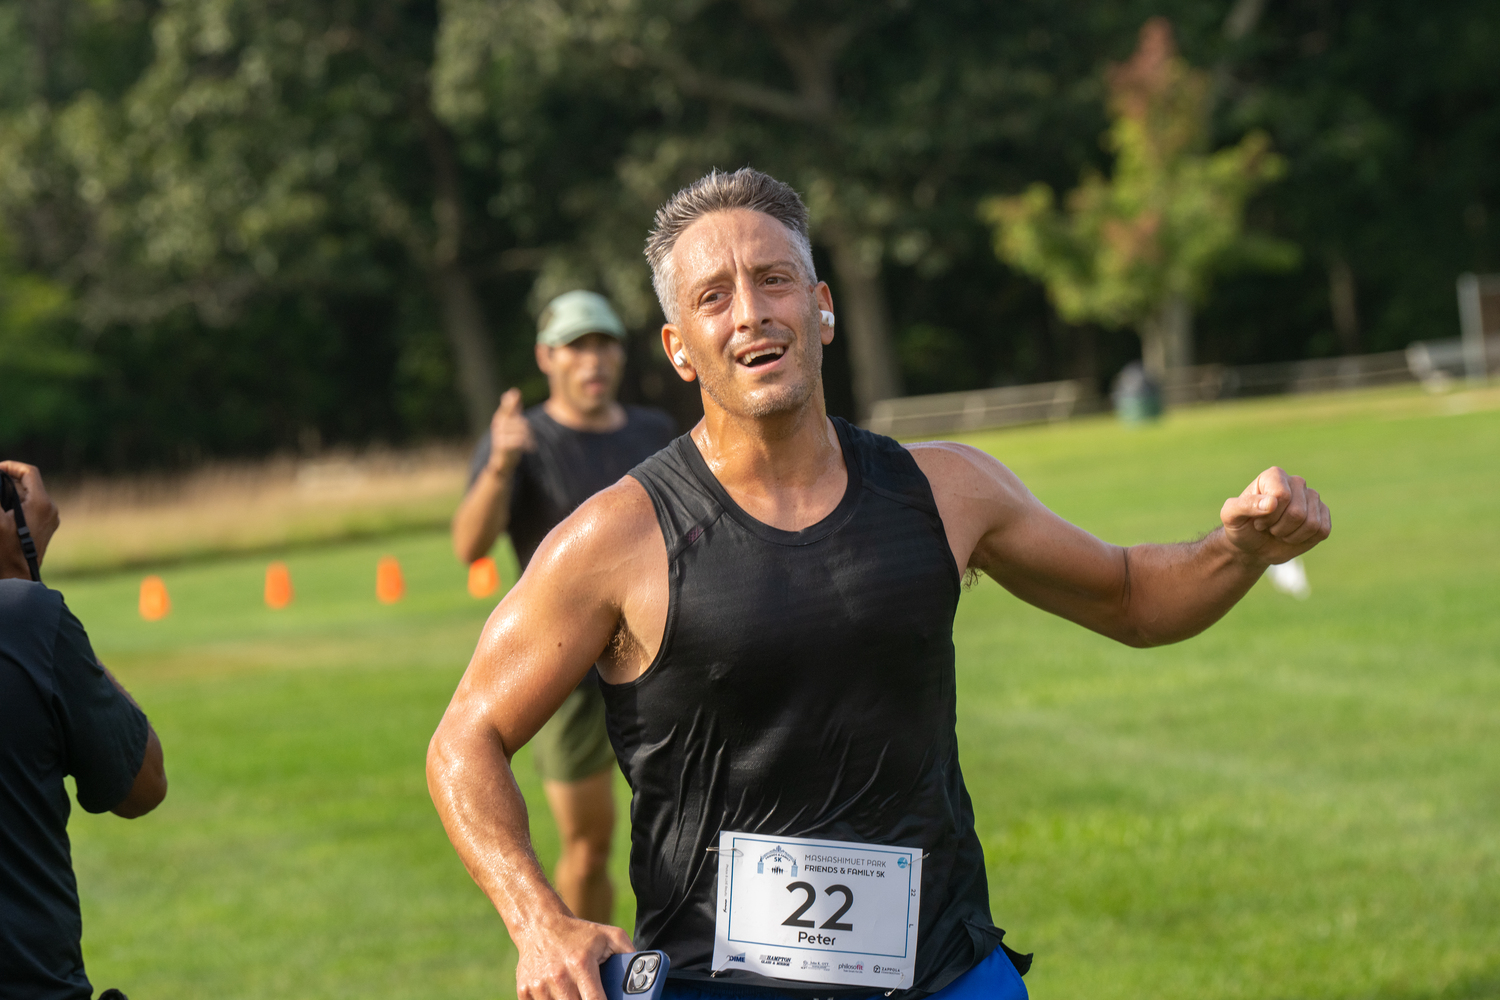 Peter Finelli, 44, of Sag Harbor placed third overall.   RON ESPOSITO